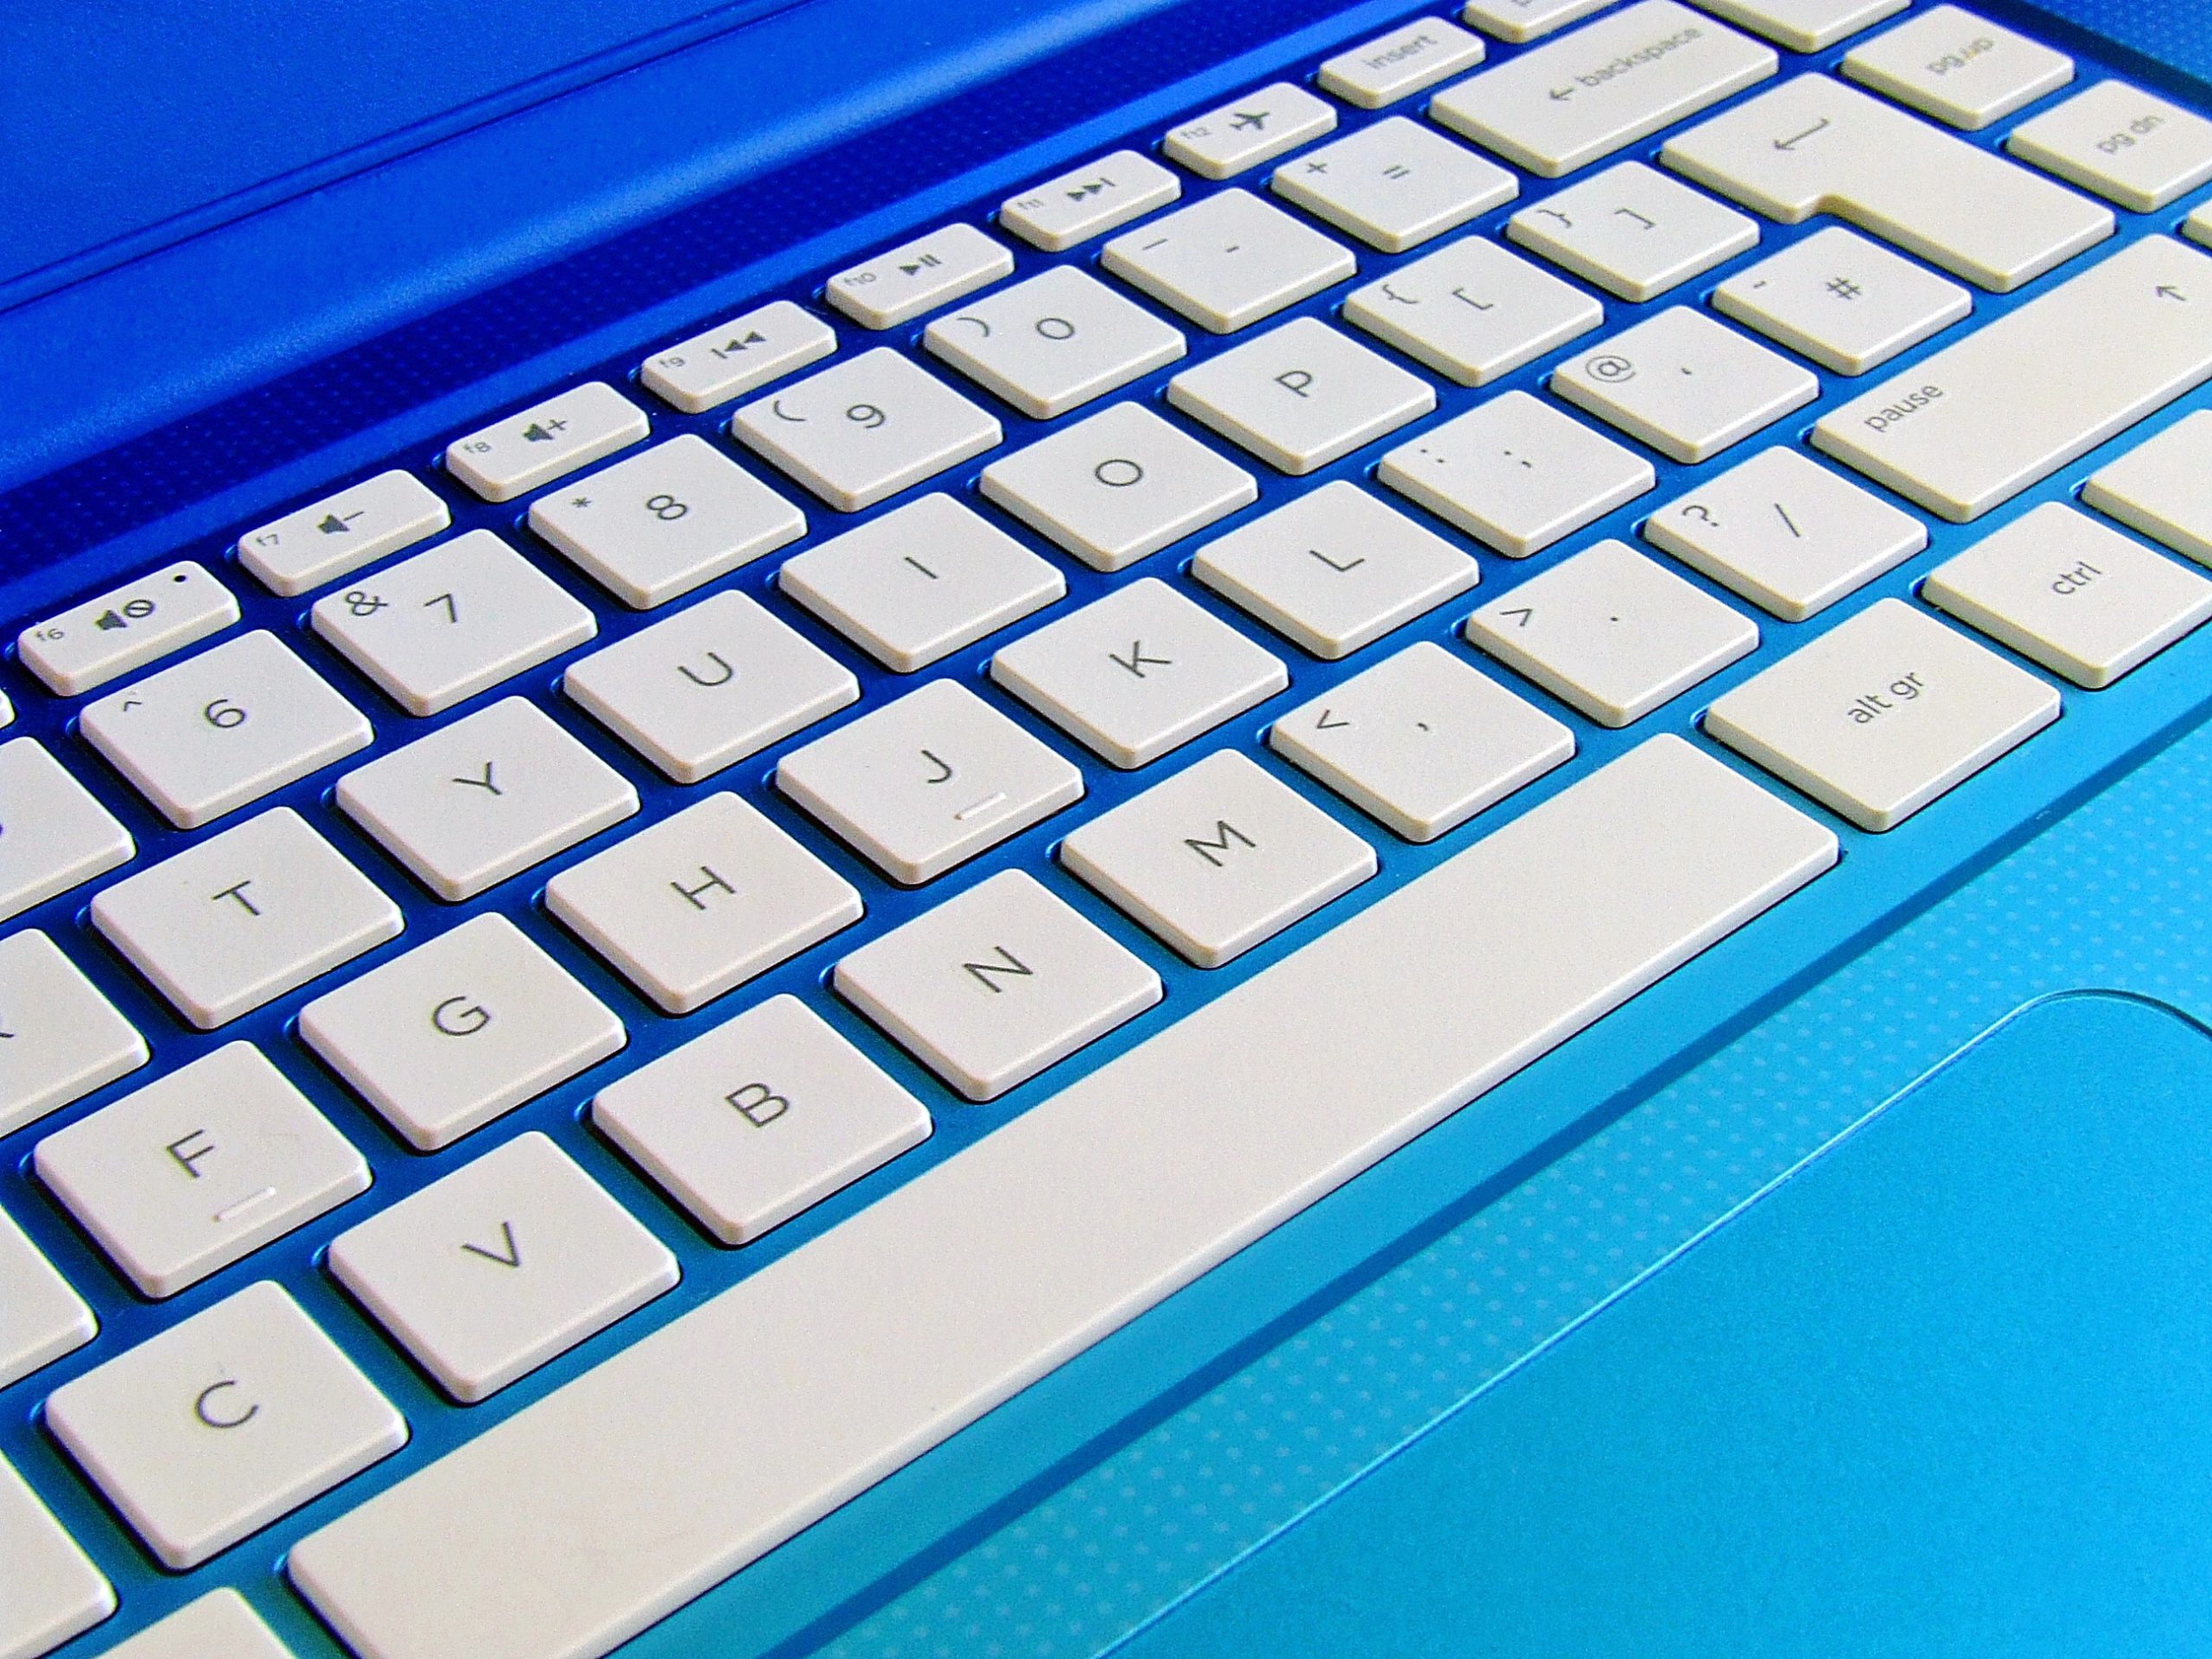 14 Microsoft Word Shortcuts to Quickly Select Text (Words, Lines and Paragraphs)